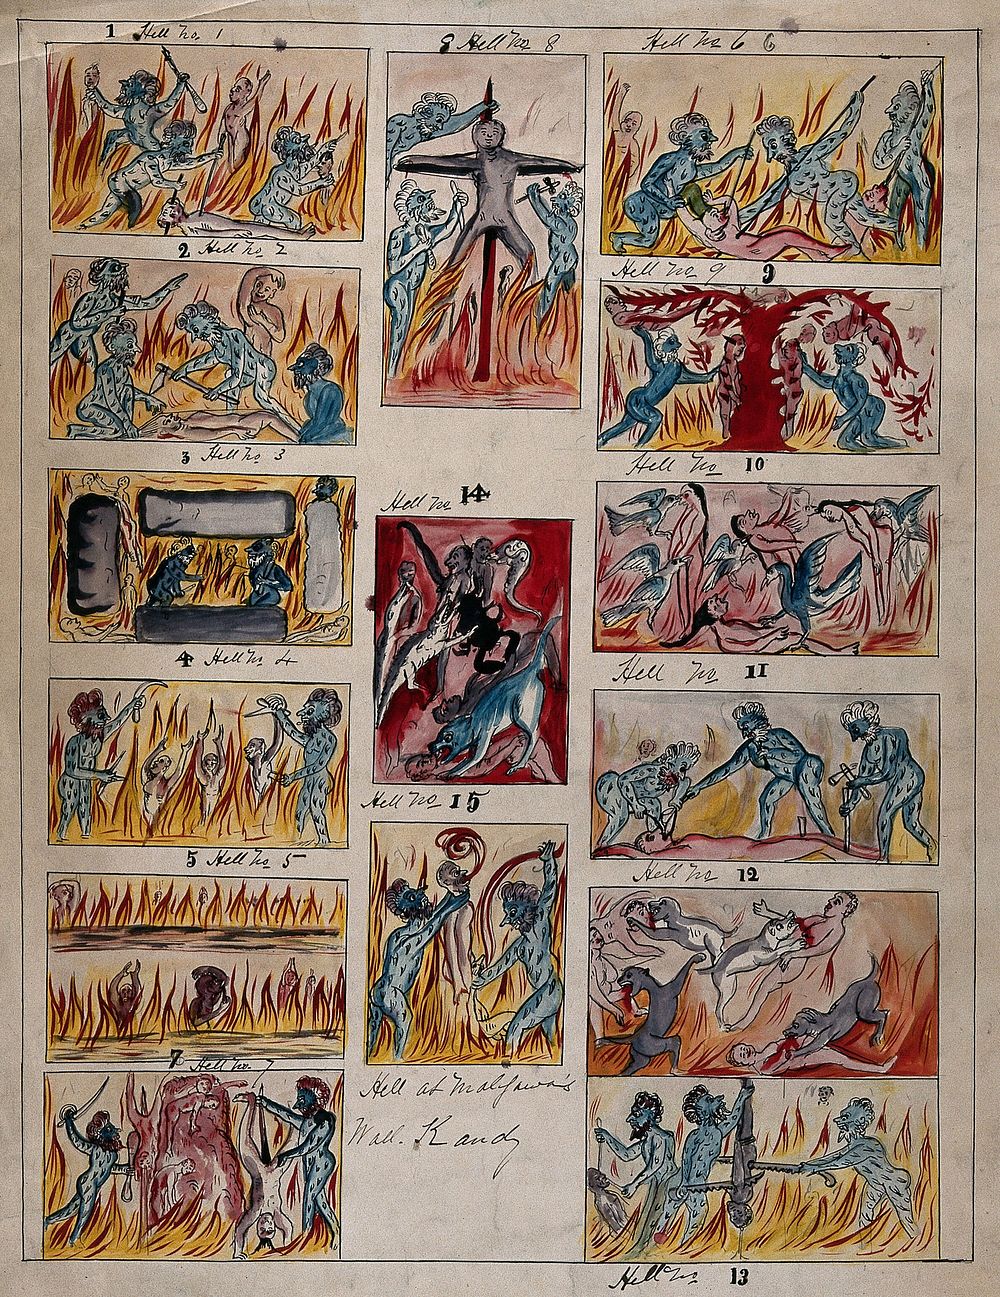 Sri Lanka: Kandy, the fifteen different kinds of hell at maligawa's wall. Gouache painting by a Sri Lankan artist.